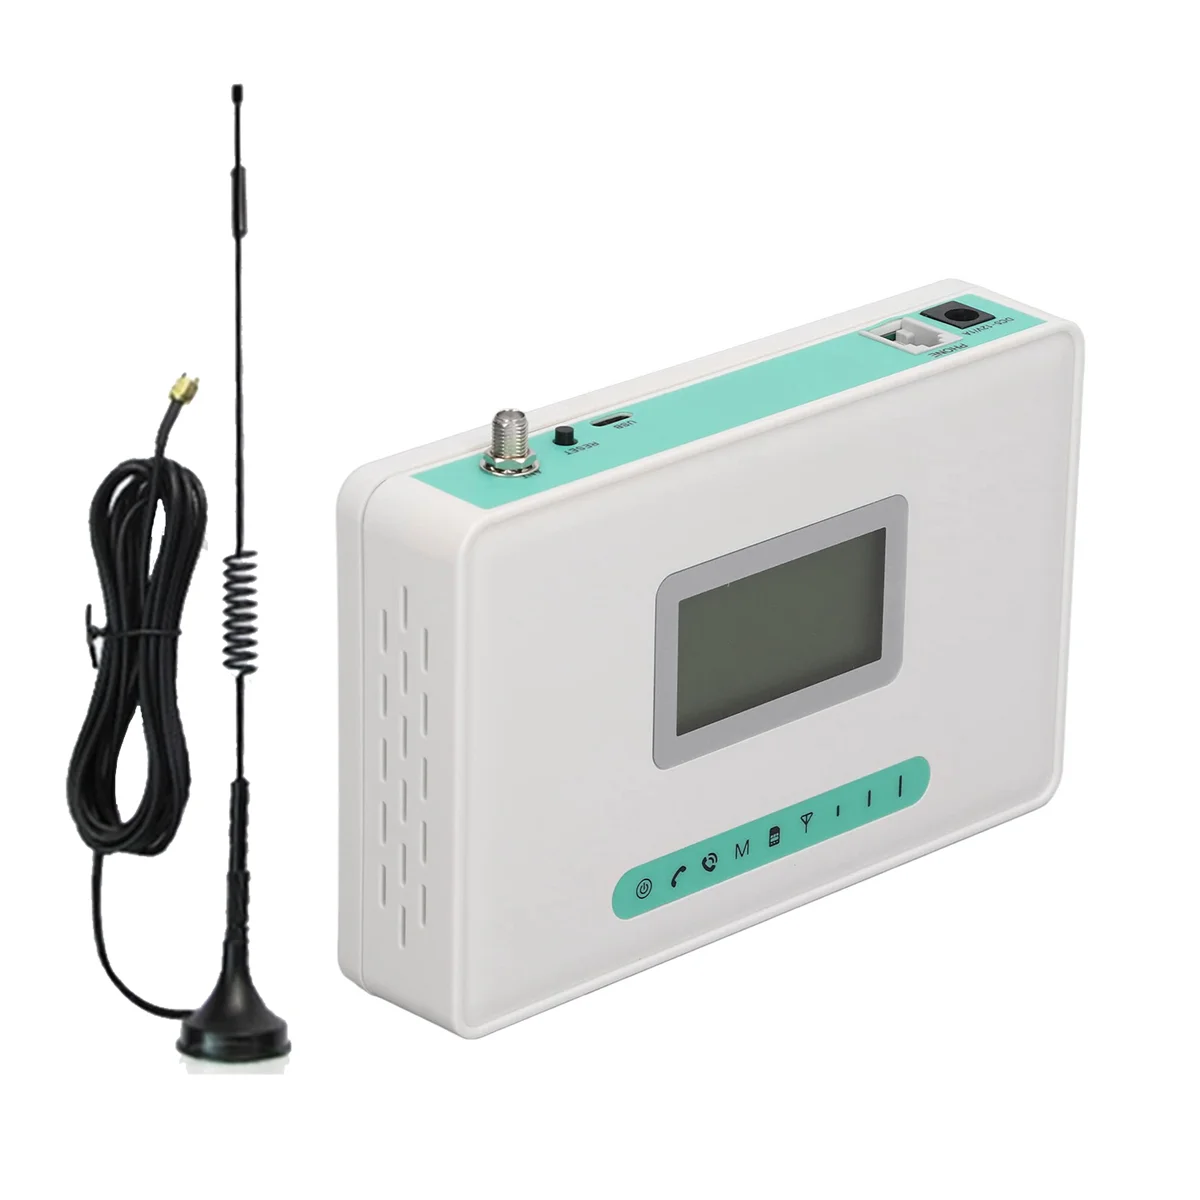 

4G Fixed Wireless Terminal with Screen for Connecting Desktop Phone or Alarm System (US Plug)